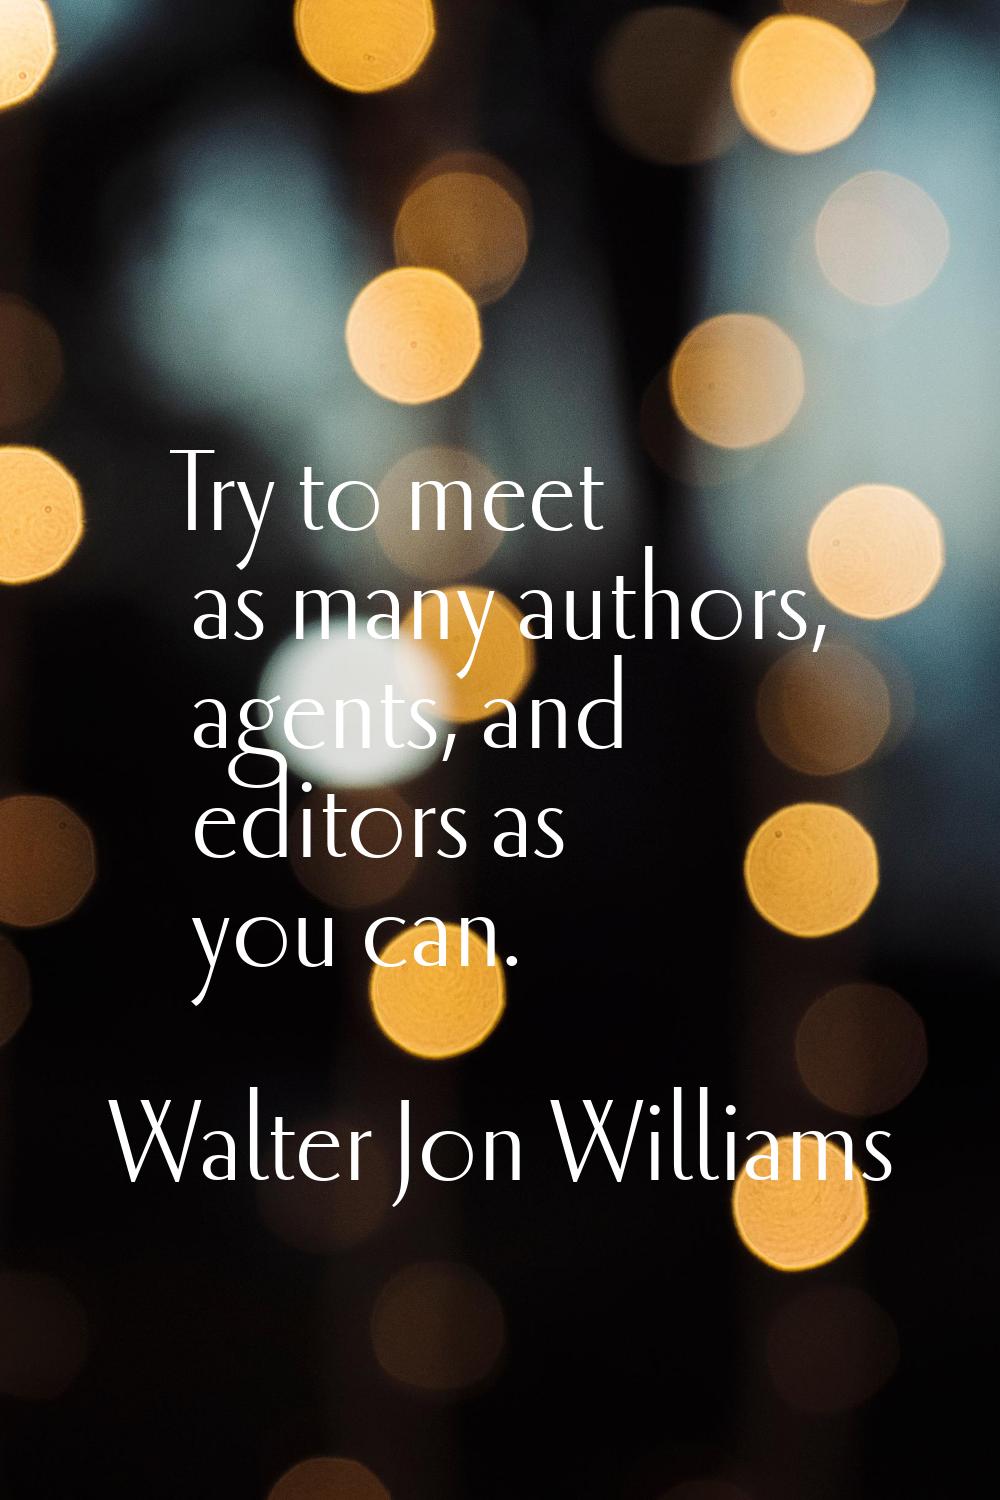 Try to meet as many authors, agents, and editors as you can.